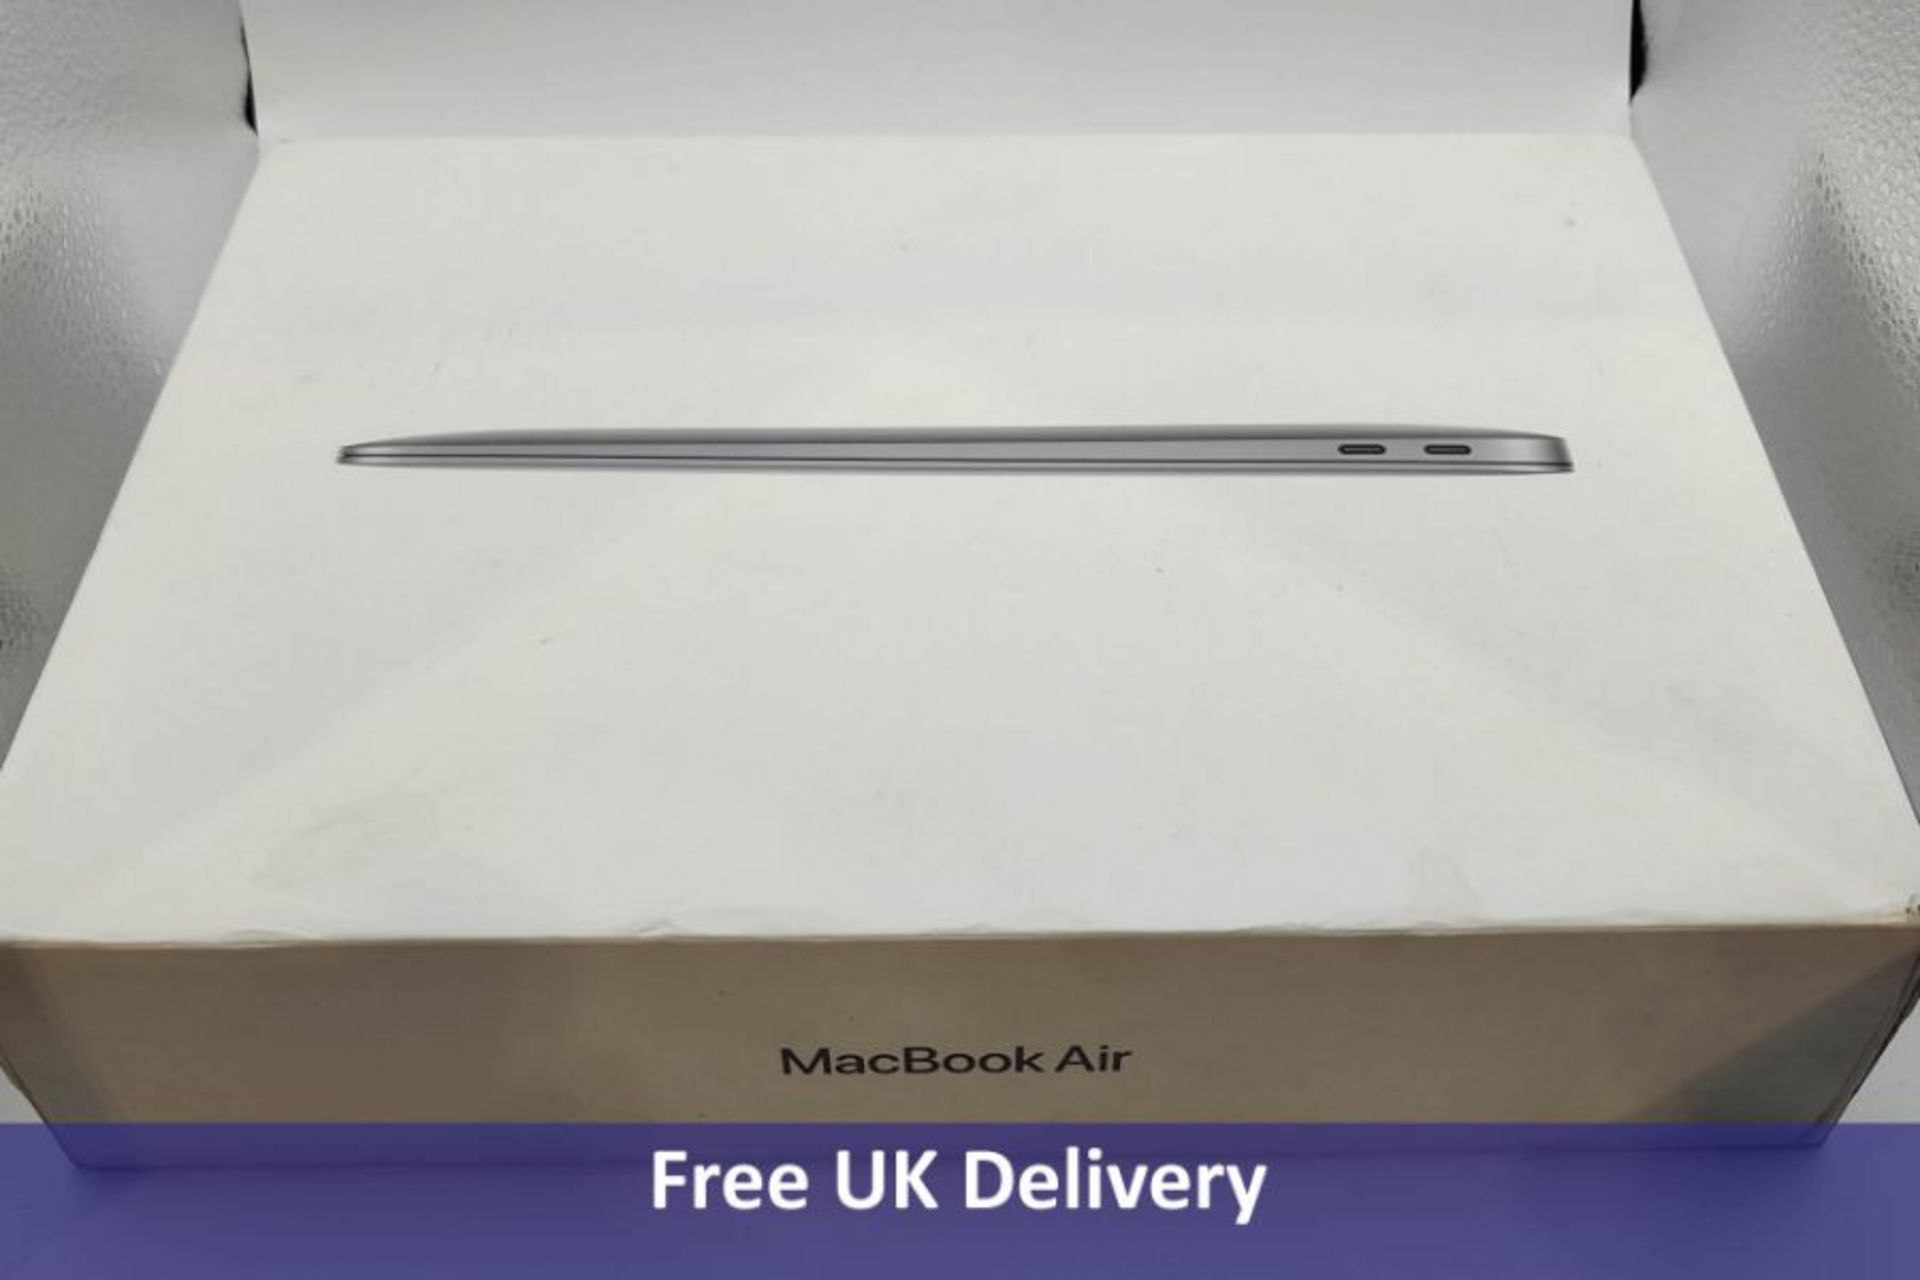 Apple MacBook Air 13" M1, A2337, 8GB RAM, 512GB SSD, US Keyboard. Used, boxed, no cables or power su